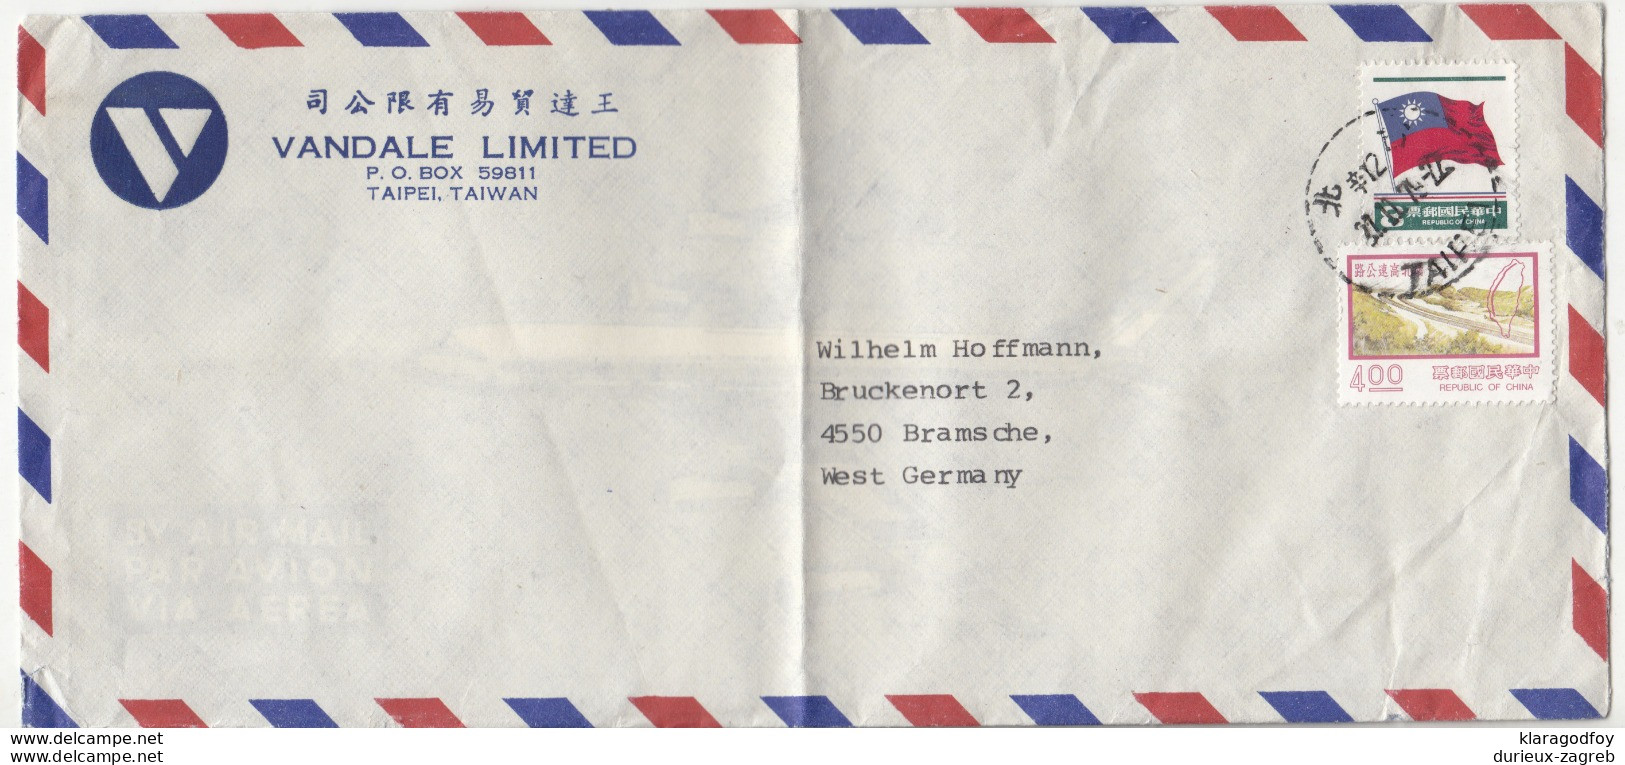 Vandale Limited Taipei Company Air Mail Letter Cover Travelled 197? To Germany B190922 - Lettres & Documents